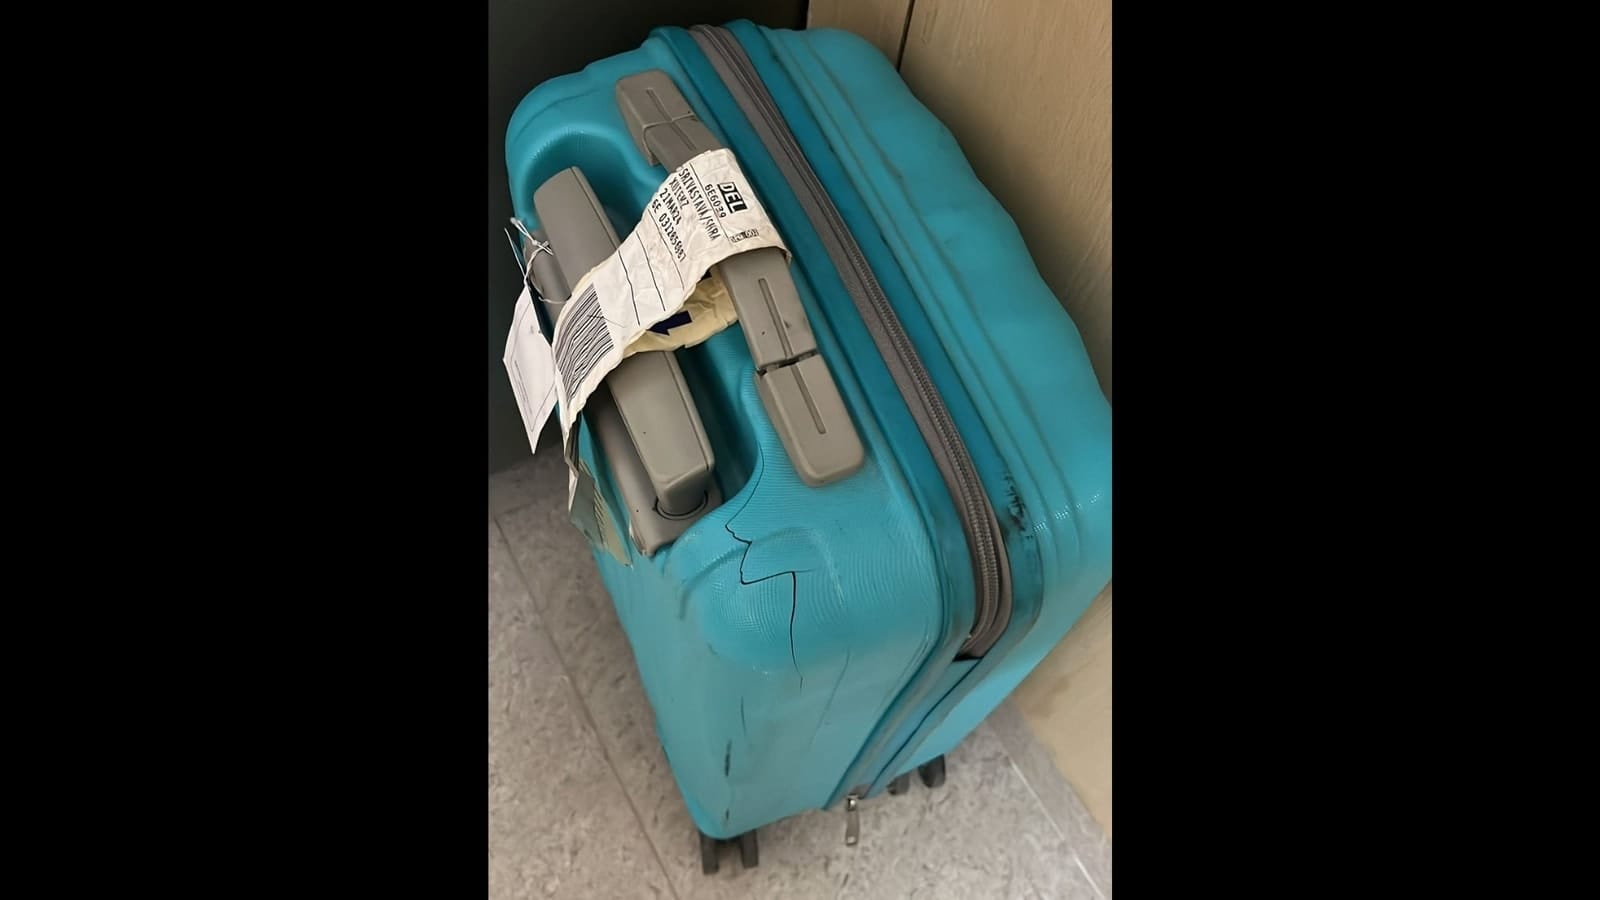 IndiGo passenger receives damaged luggage, airline ‘regrets the inconvenience caused’